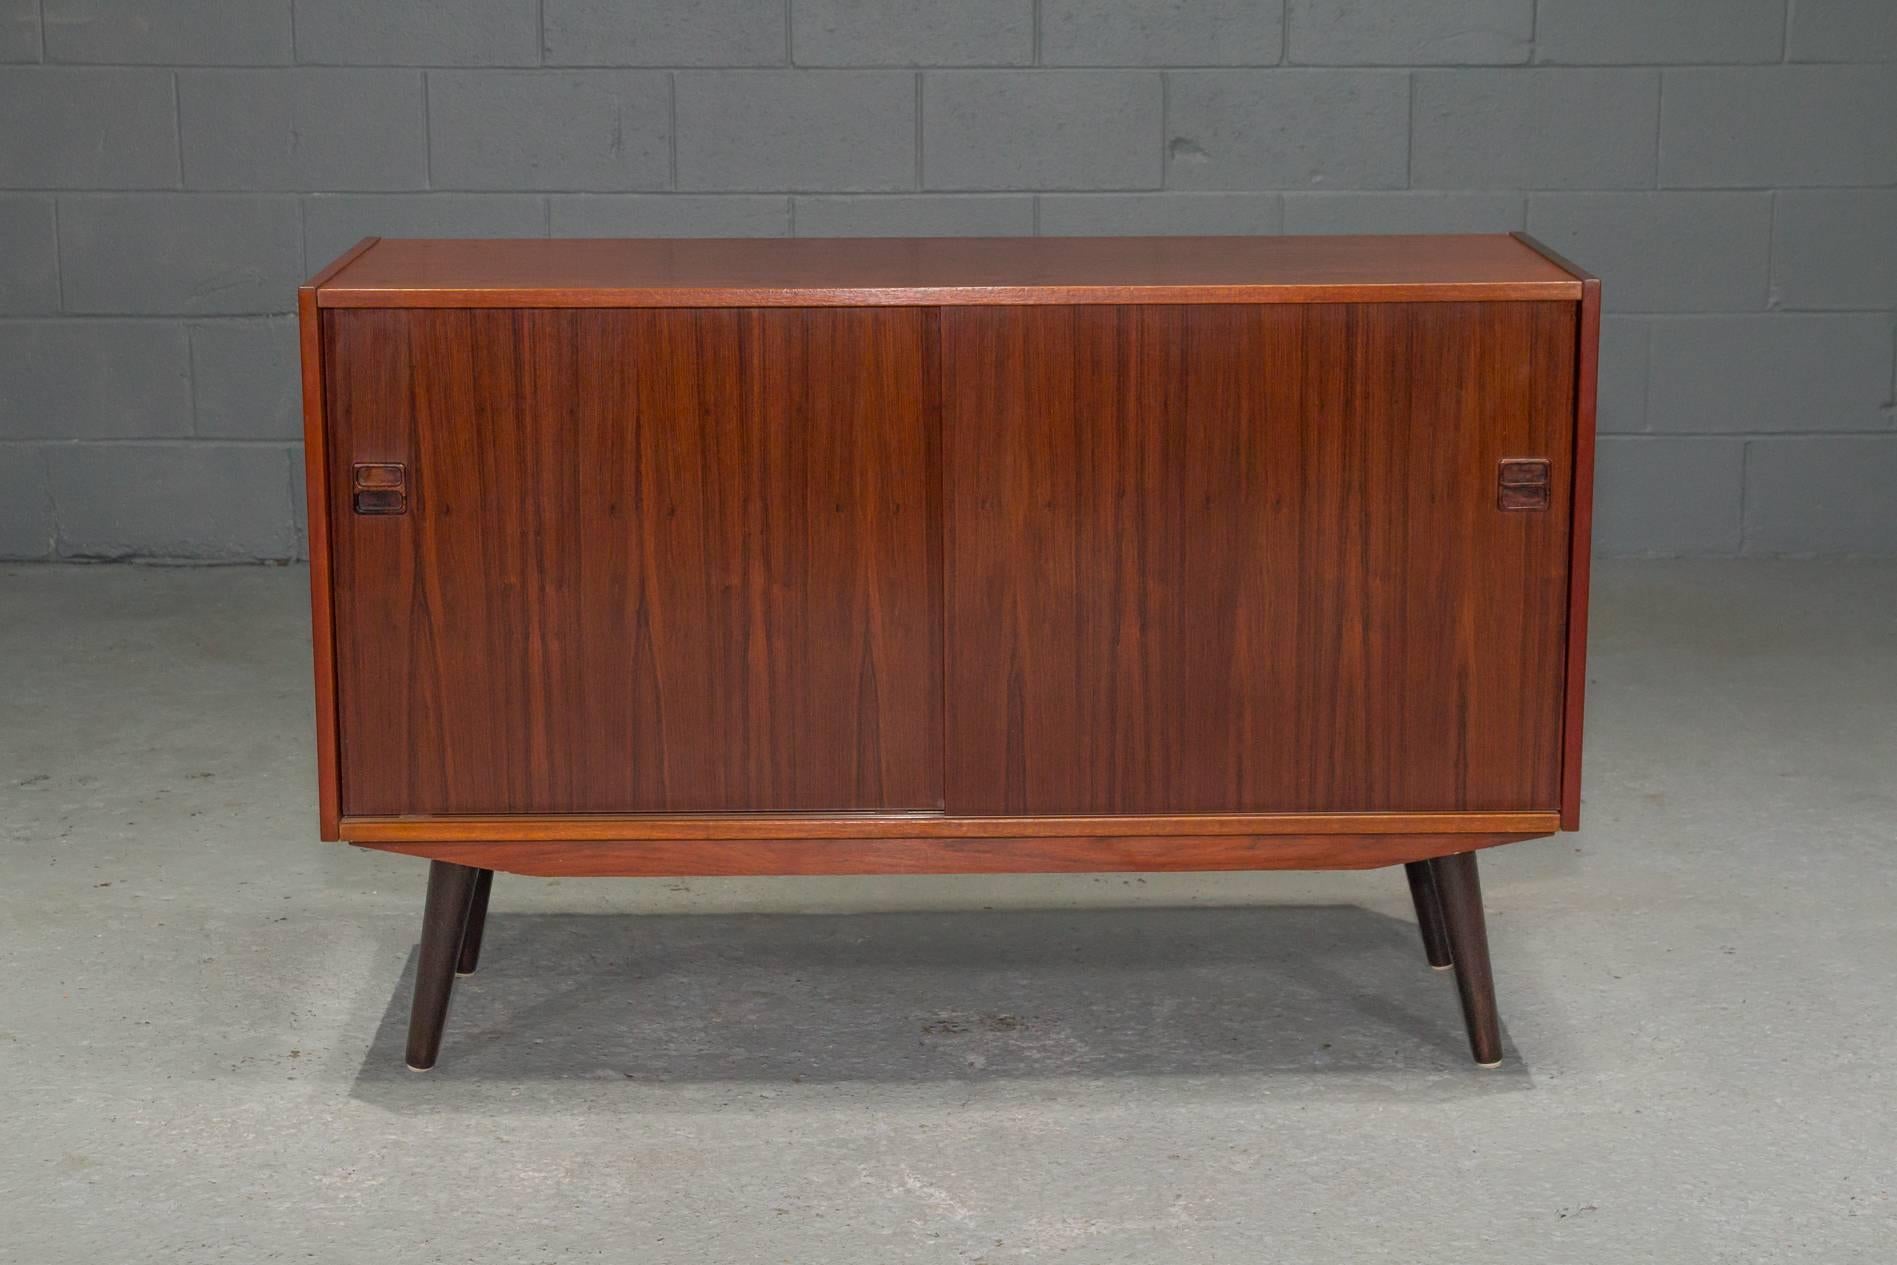 Small Two-Door Danish Modern Rosewood Sideboard on angled tapered legs. Sliding doors open to reveal adjustable open shelving.